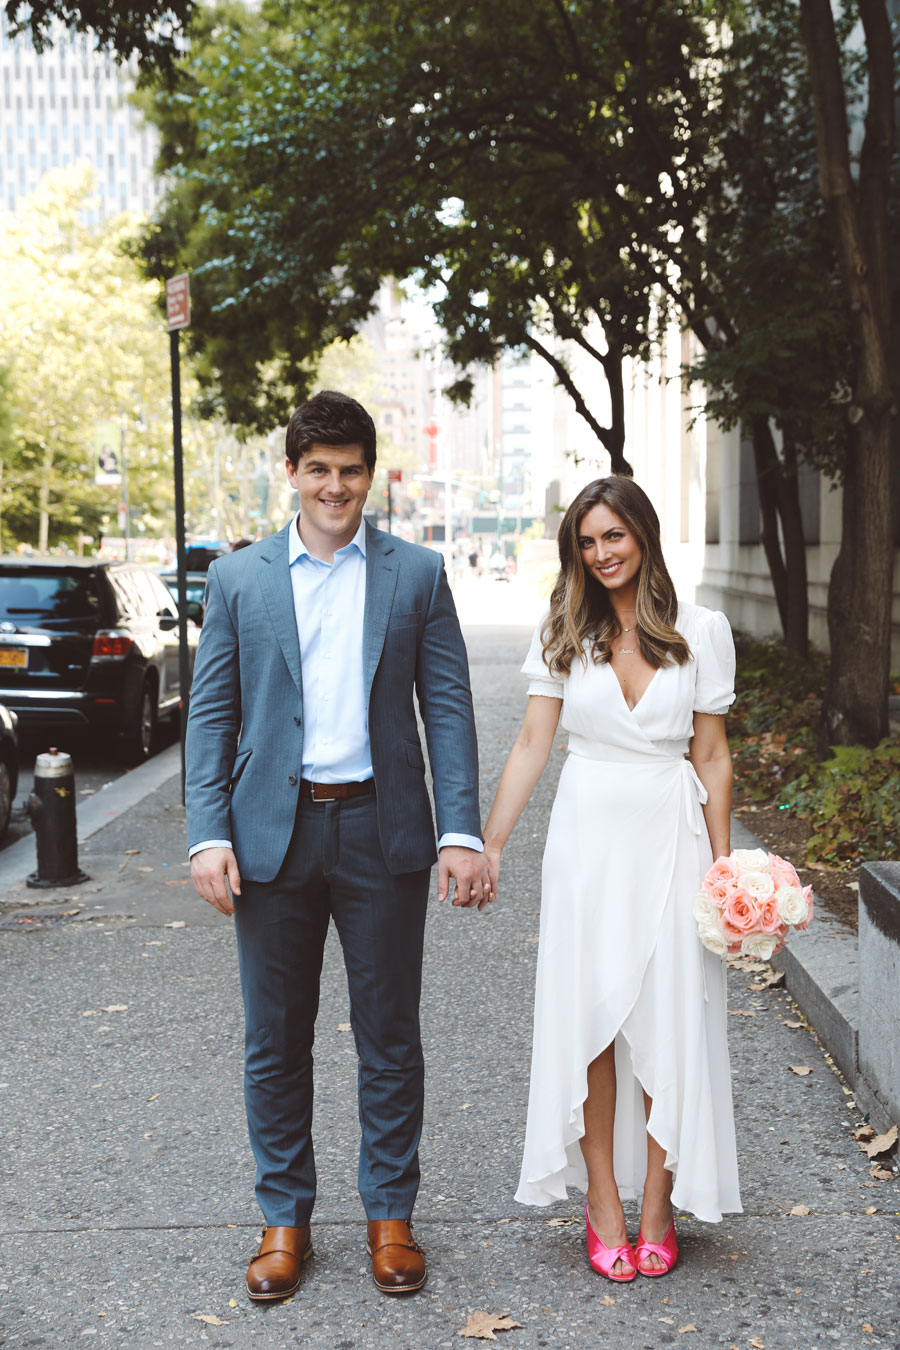 Love how casual-chic this bride and groom are dressed for their courthouse wedding. Obsessed with her pink heels. // See more: 20 Stunning Civil Wedding Outfit Ideas to Make it Official In Style. // mysweetengagement.com